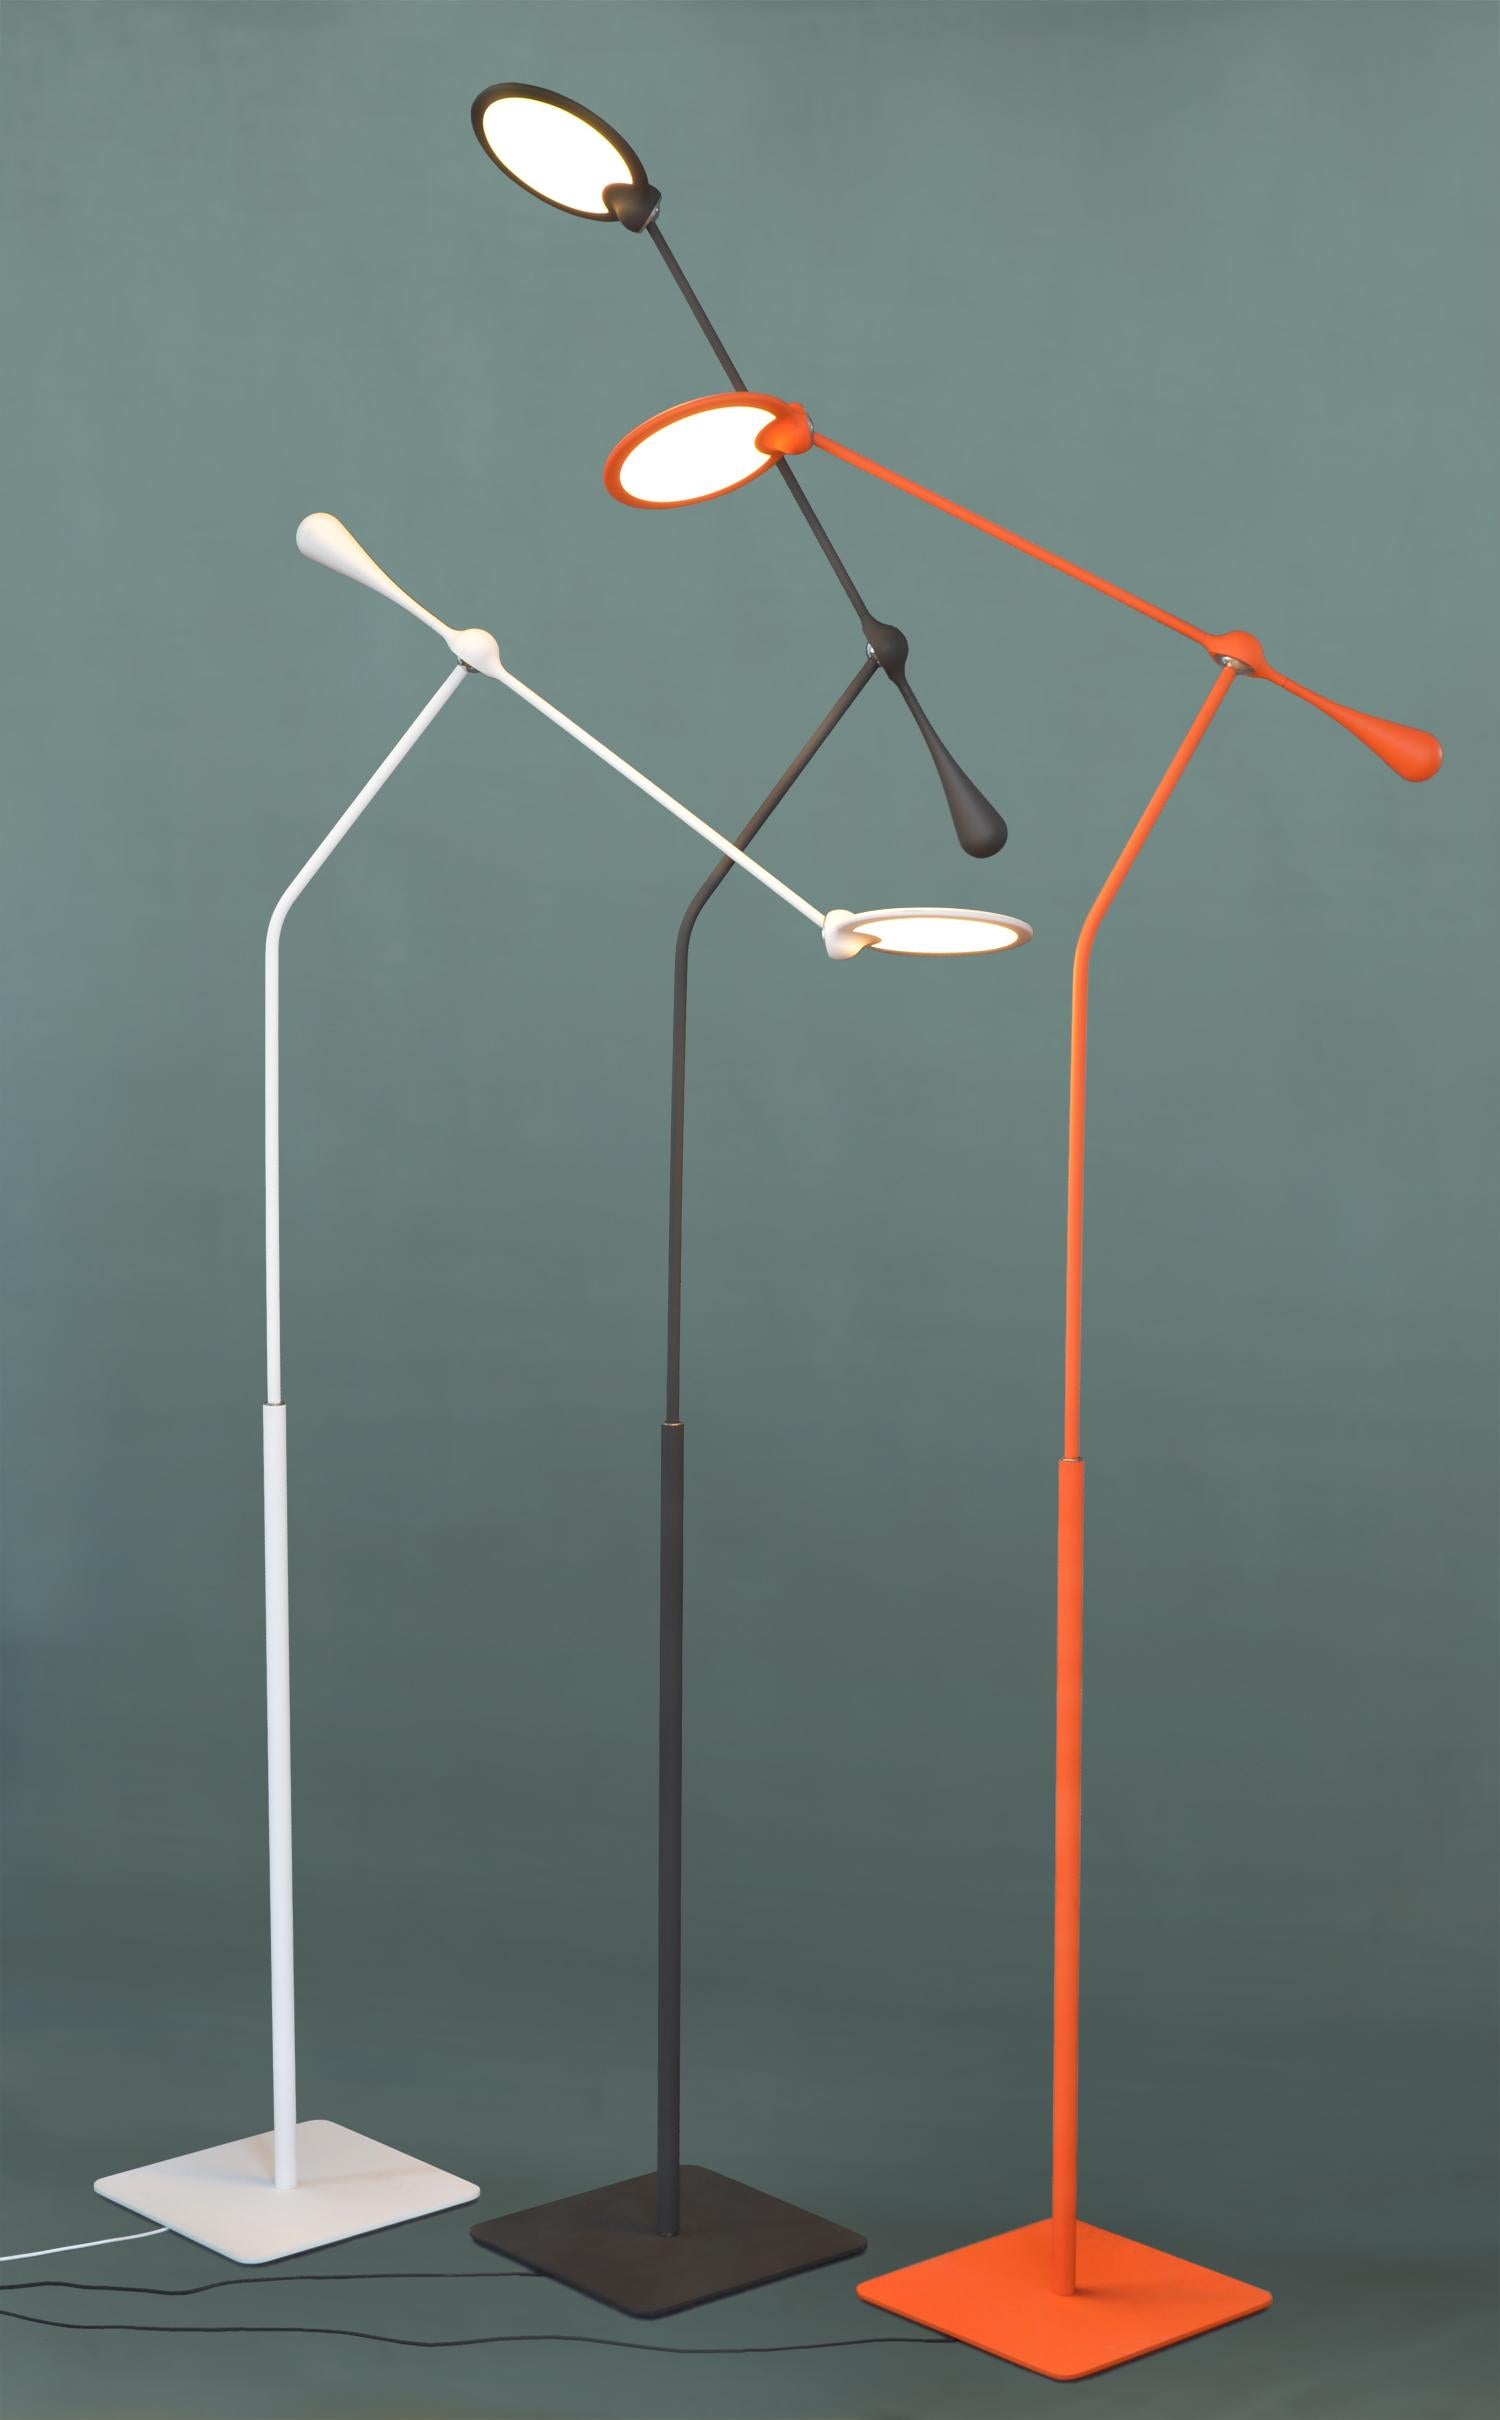 Measures: 8” square base, ?light panel 6.2” Ø, ?6’ black cord.

Aluminium, iron and steel structure, Dimmable 102 LED array, 18-380 lumens

Peter Stathis, LED light designer based in San Francisco envisioned the Trapeze lamp as an ultra-functional,